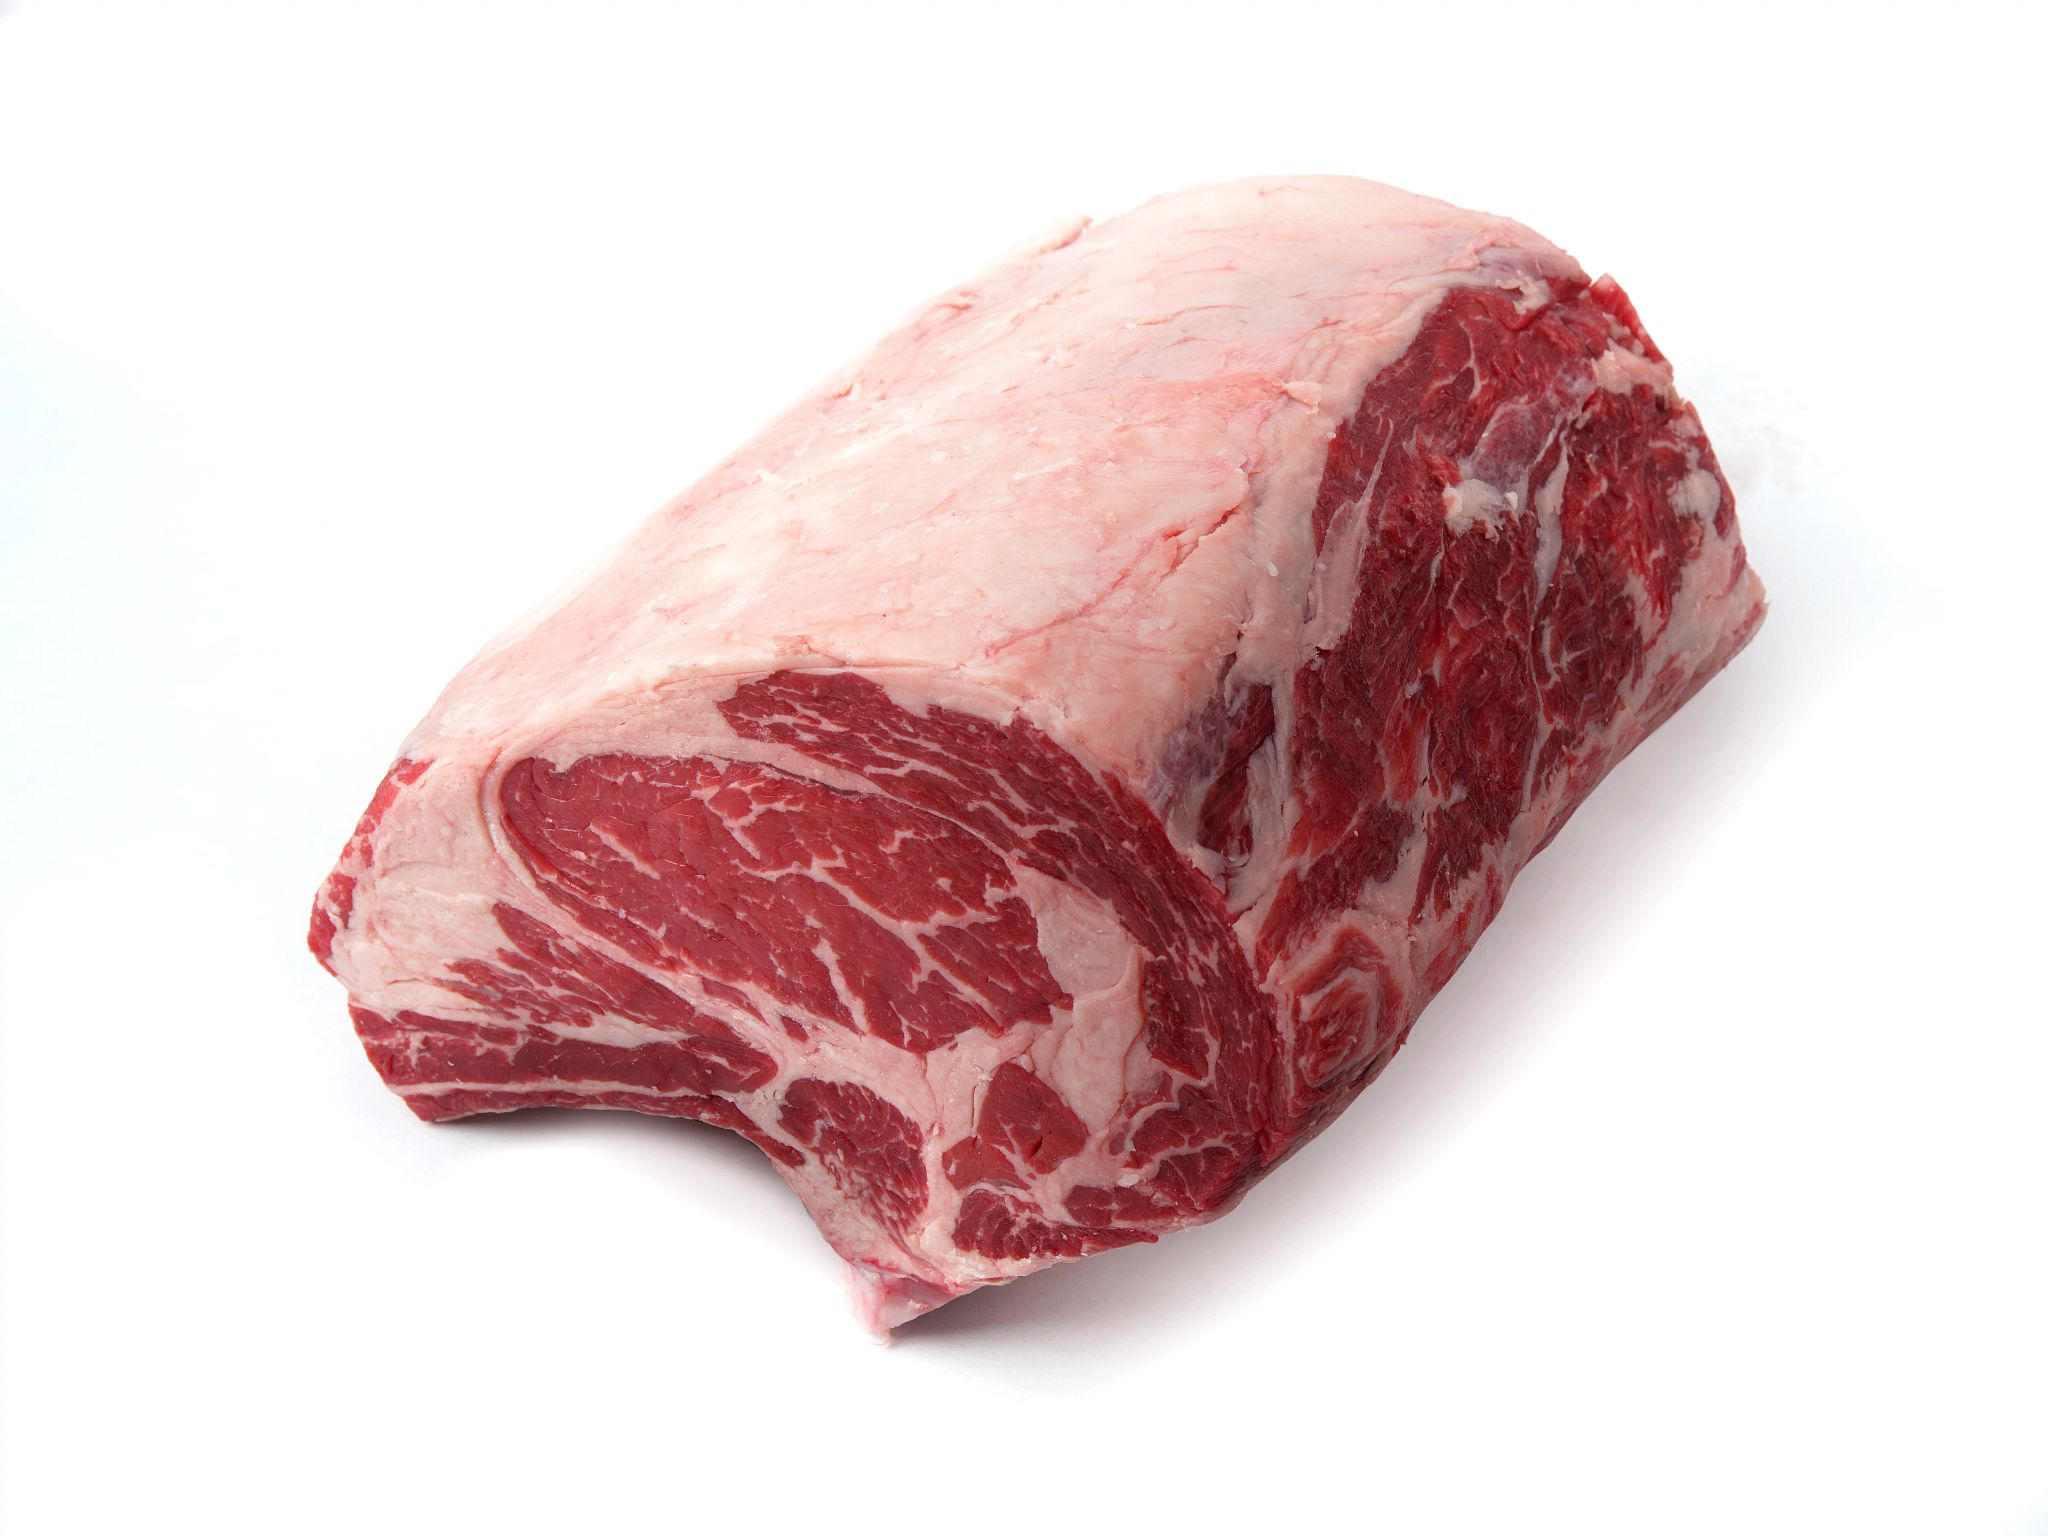 What is Prime Beef?